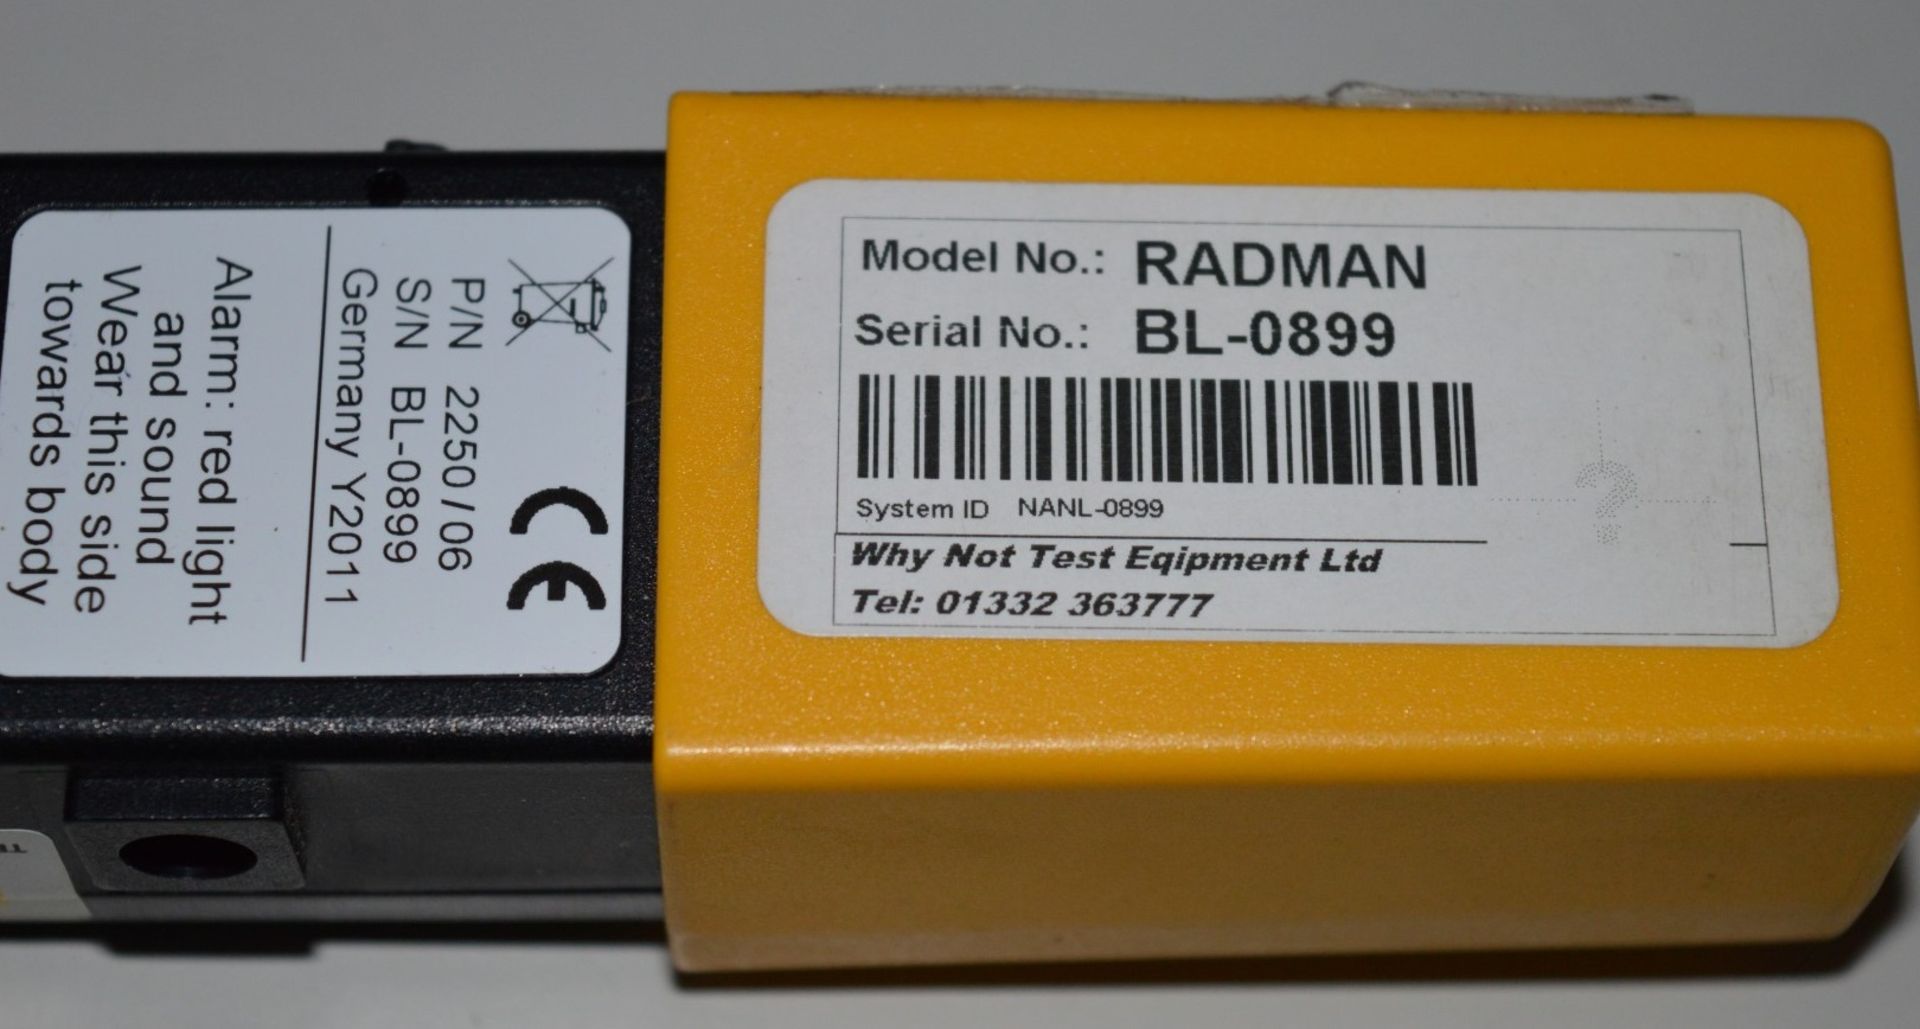 1 x Radman XT By Narda Personal RF Radiation Monitor - Part Number 2250/06 - Includes Case, - Image 6 of 6